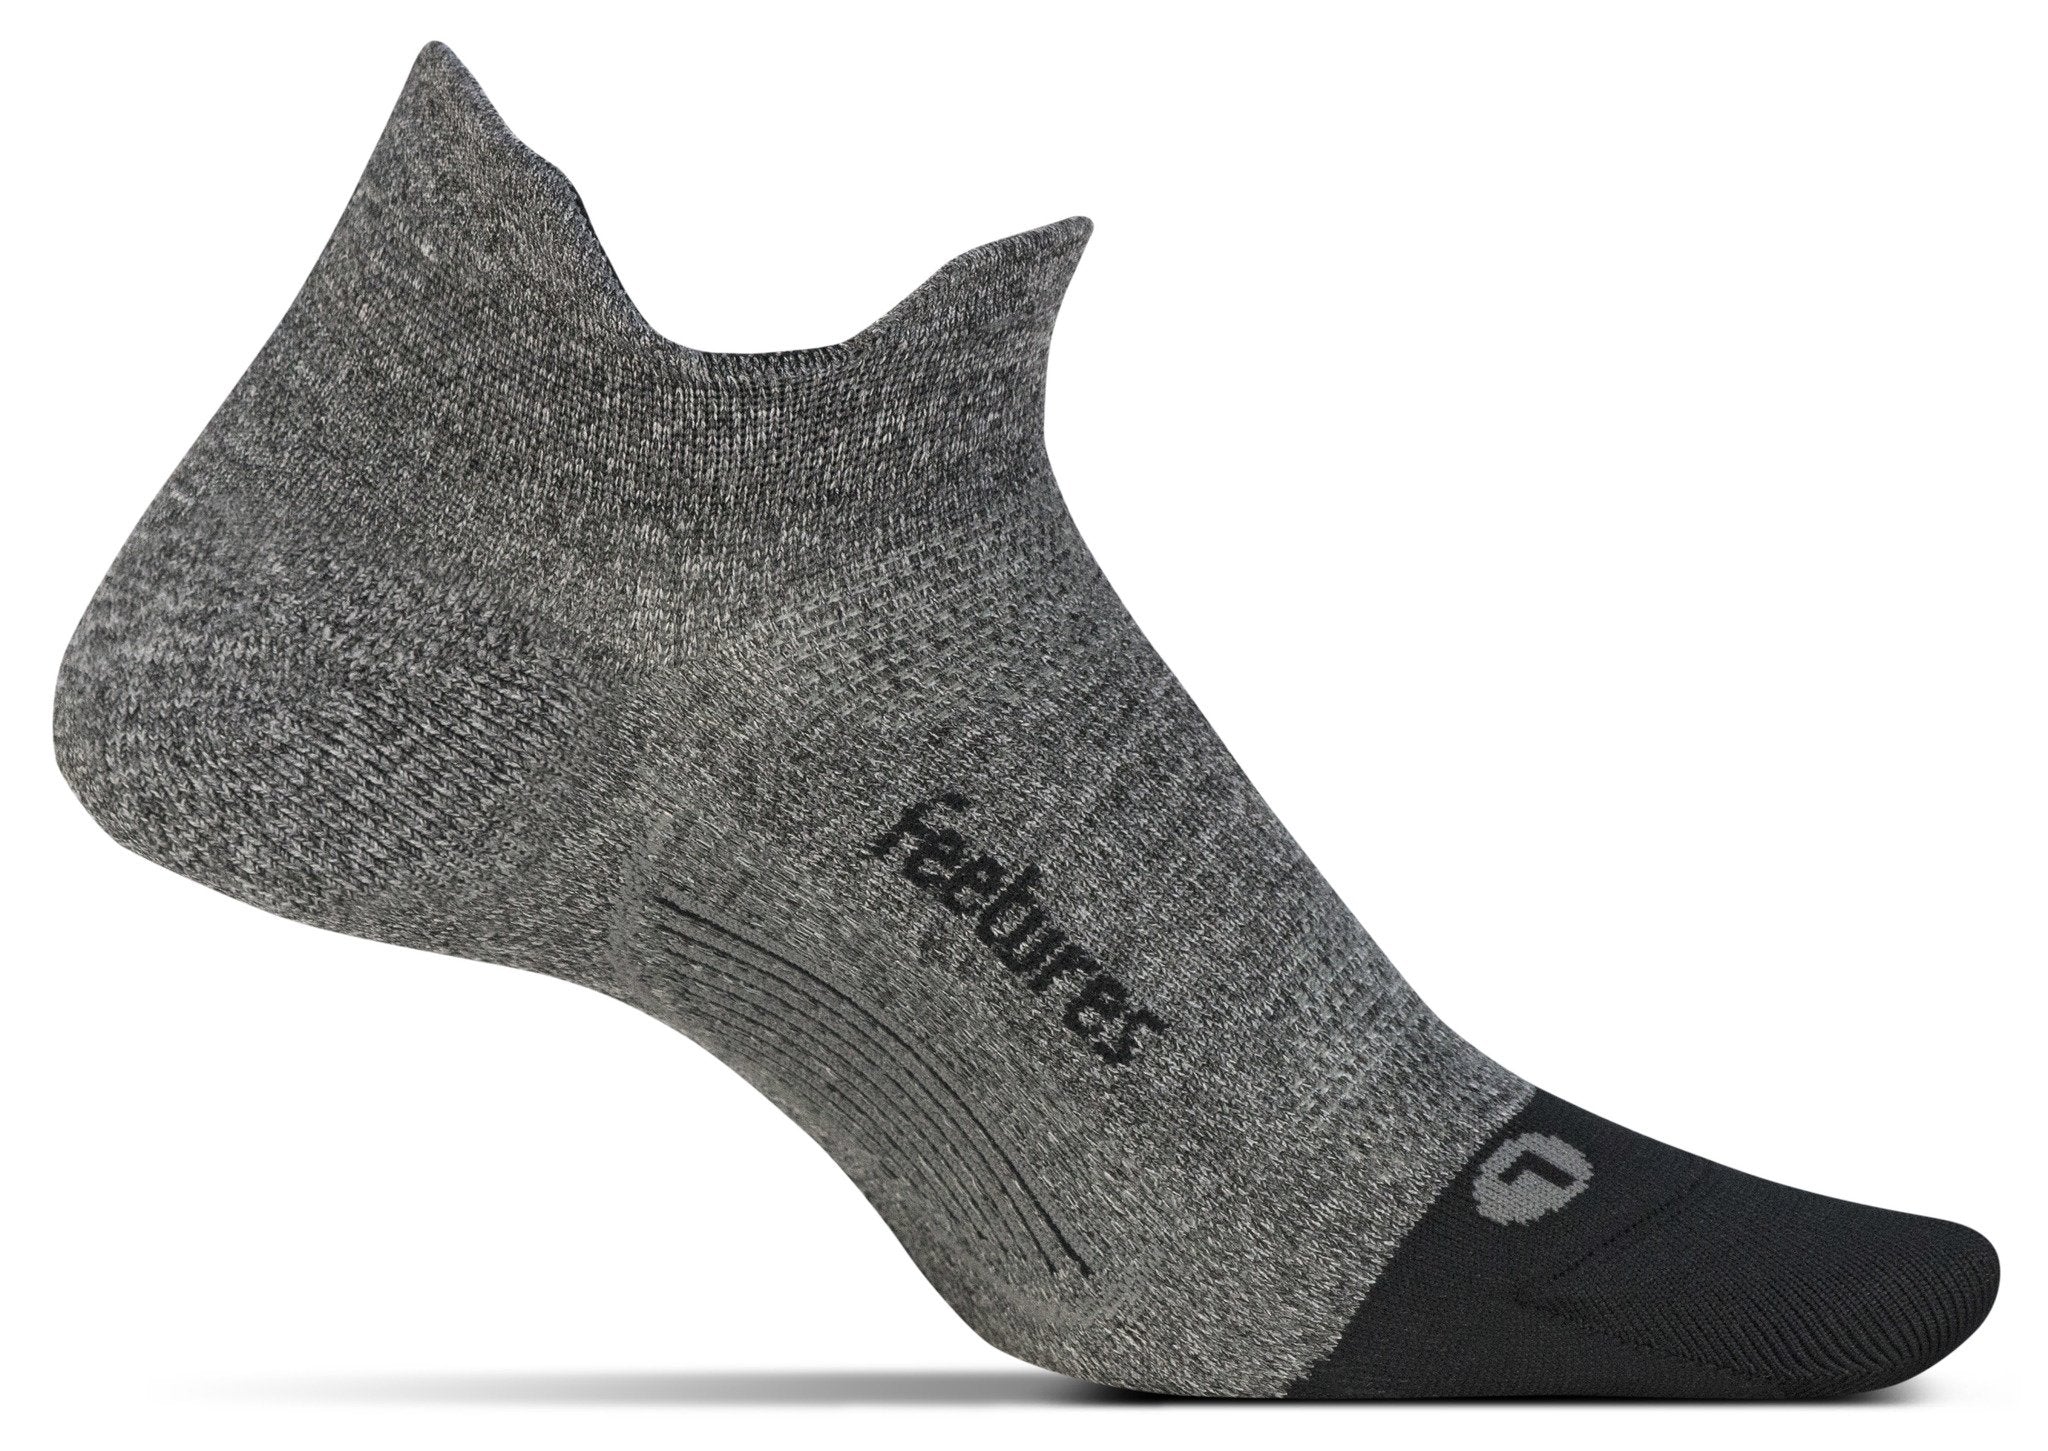 A medial view of the Feetures Elite Light Cushion running sock (left foot) in the color grey.